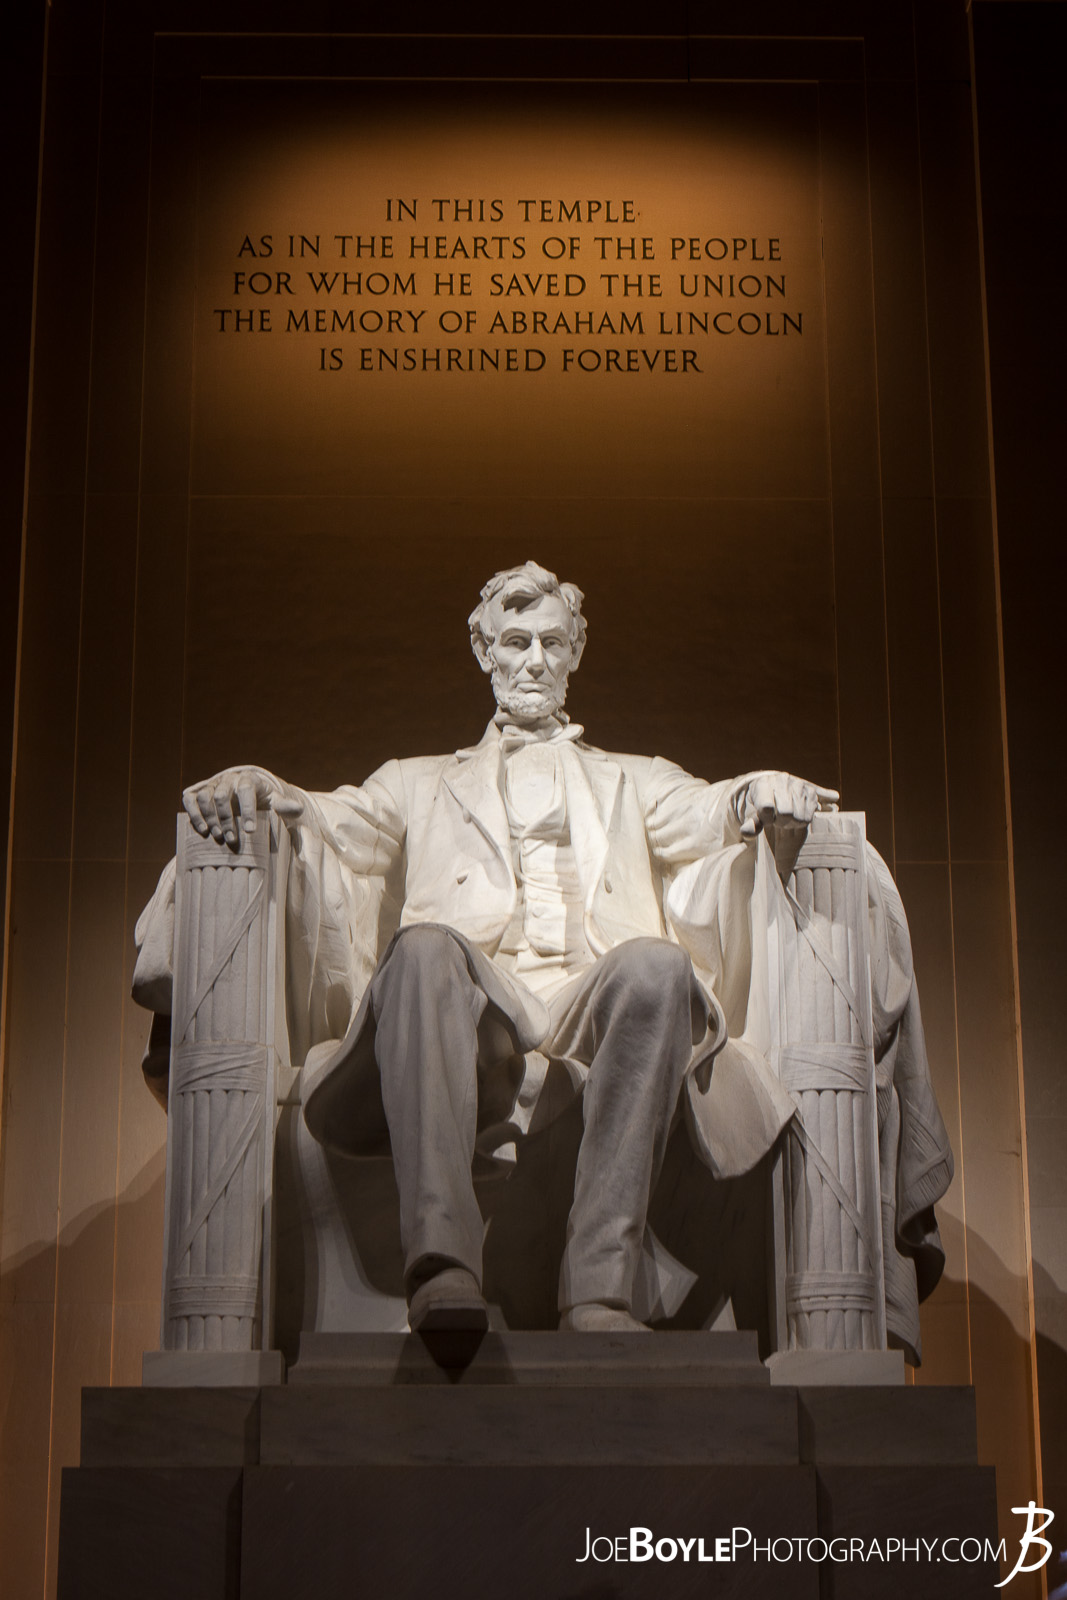  While I was in Washington, DC I was able to take some great night images of a few of the iconic landmarks that make up this city! Here is an image of the Lincoln Memorial with the epitaph over it! 